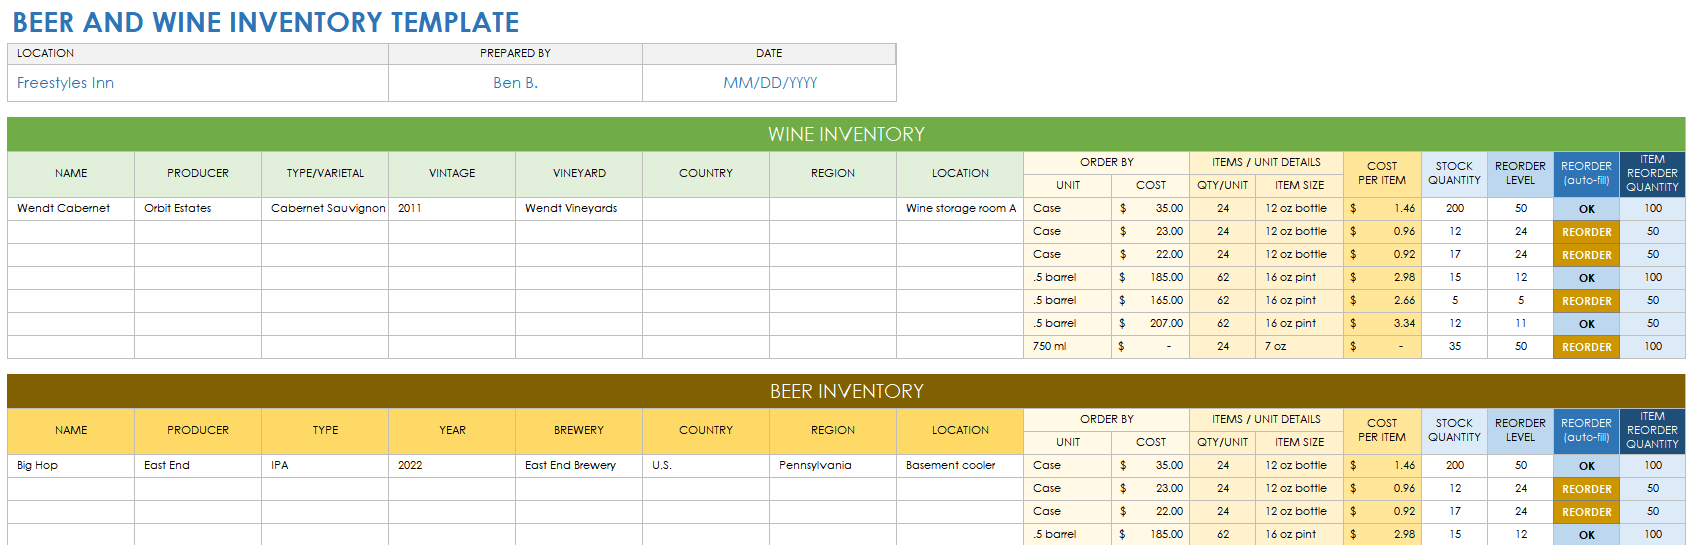 Beer and Wine Inventory Template